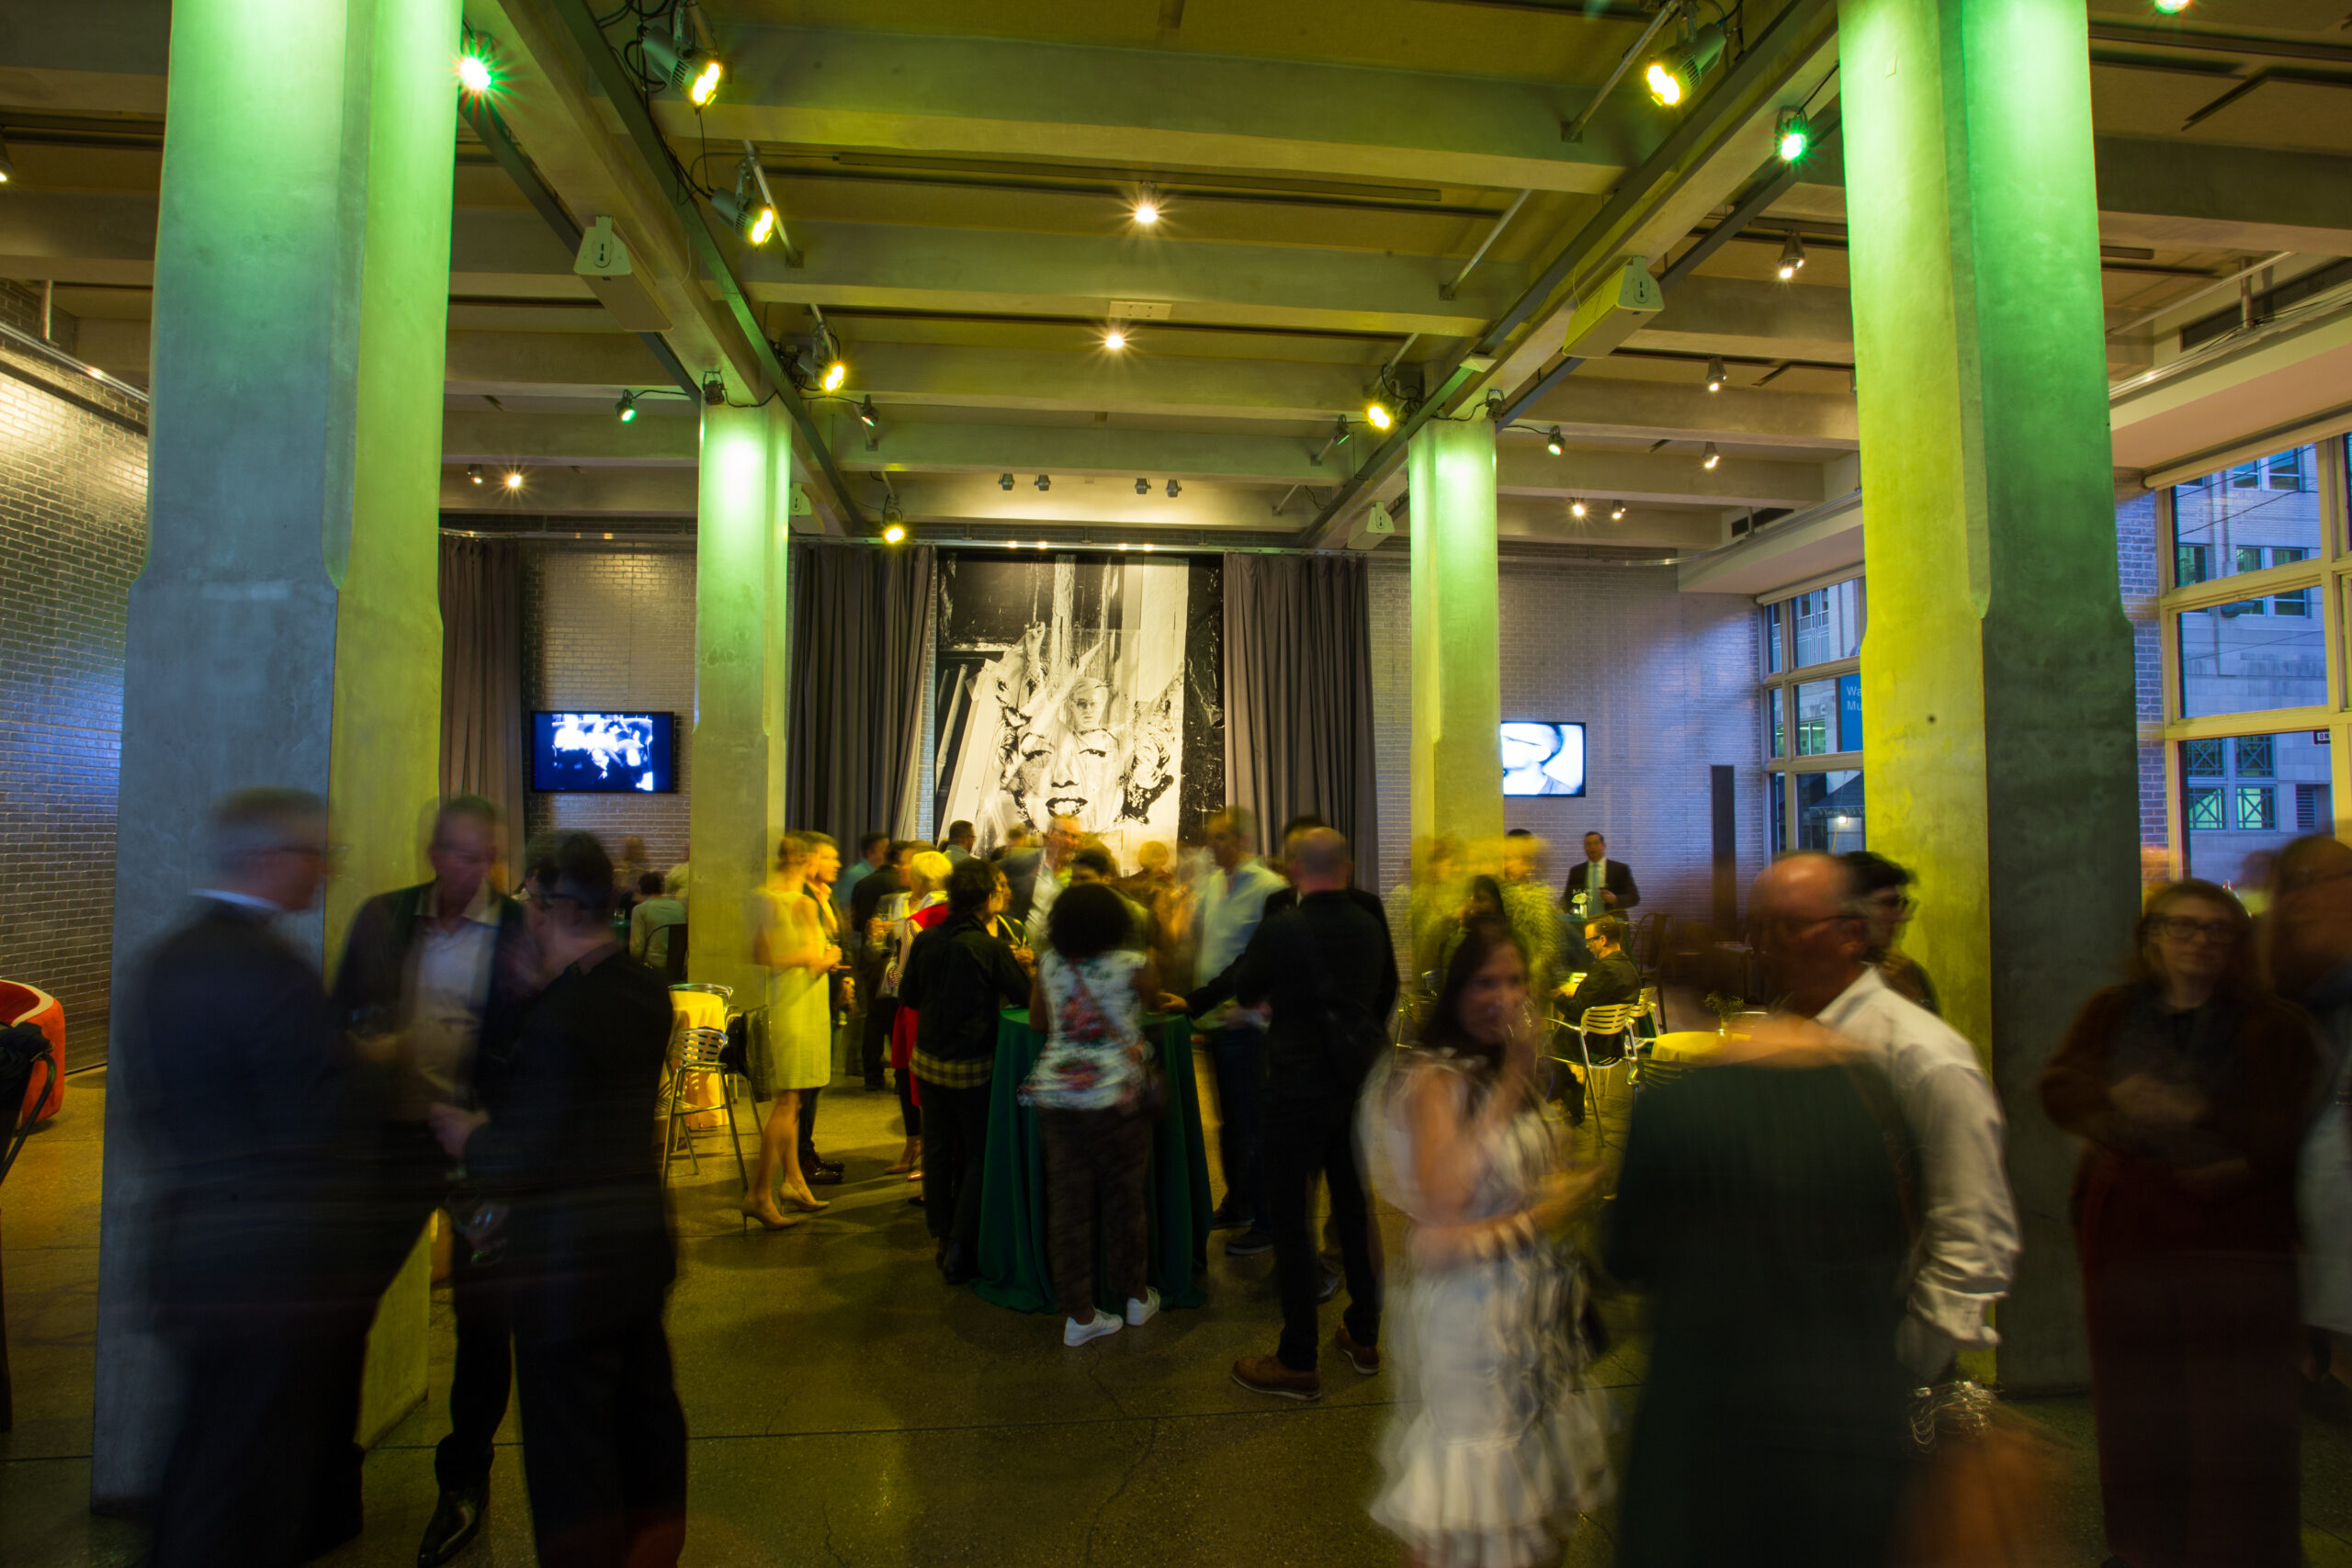 The Andy Warhol Museum’s lobby space is illuminated with bright green party lights as a crowd of patrons mingle. The image was taken using a long exposure making all of the moving people in the scene appear blurry as the architecture of the room appears clear.